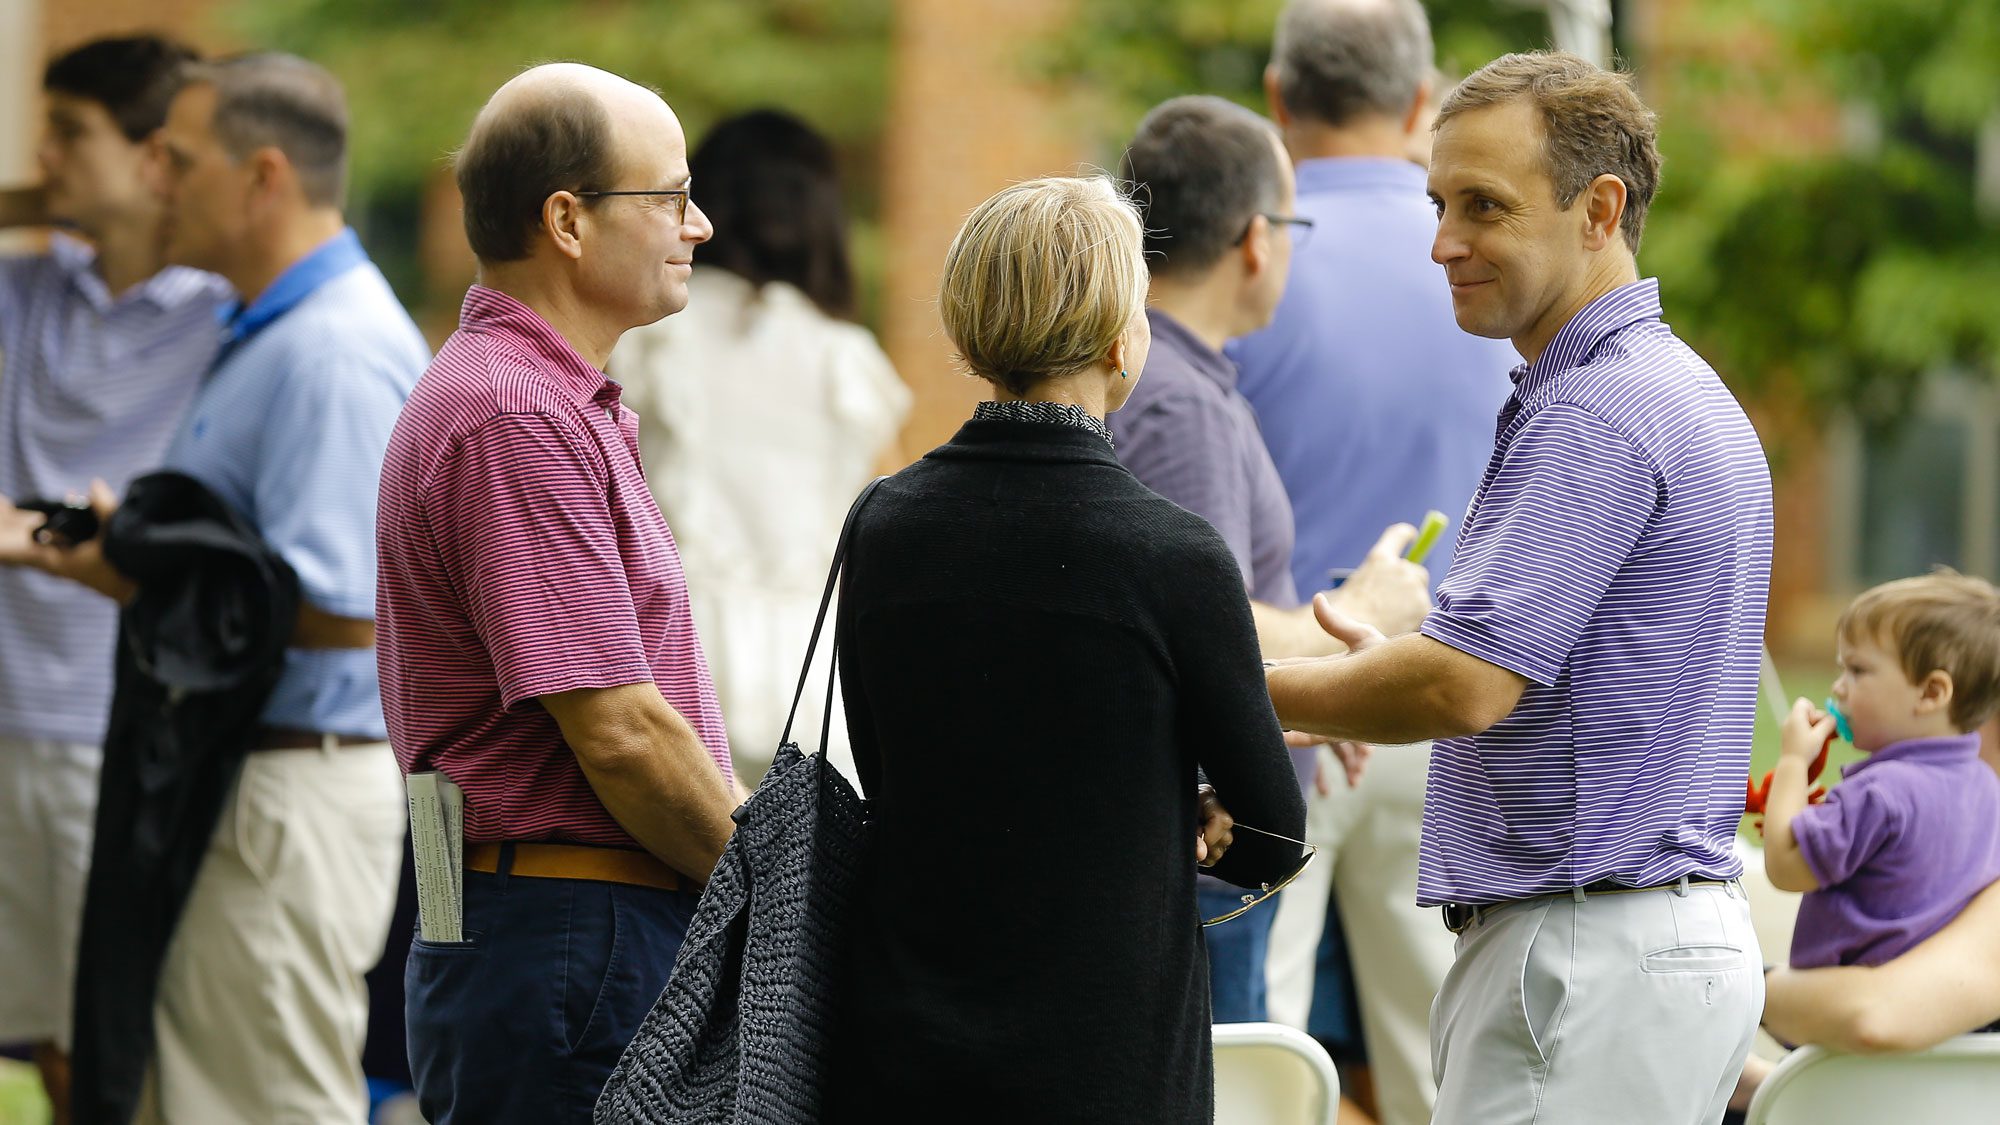 Parents chatting during the activities of Family Weekend